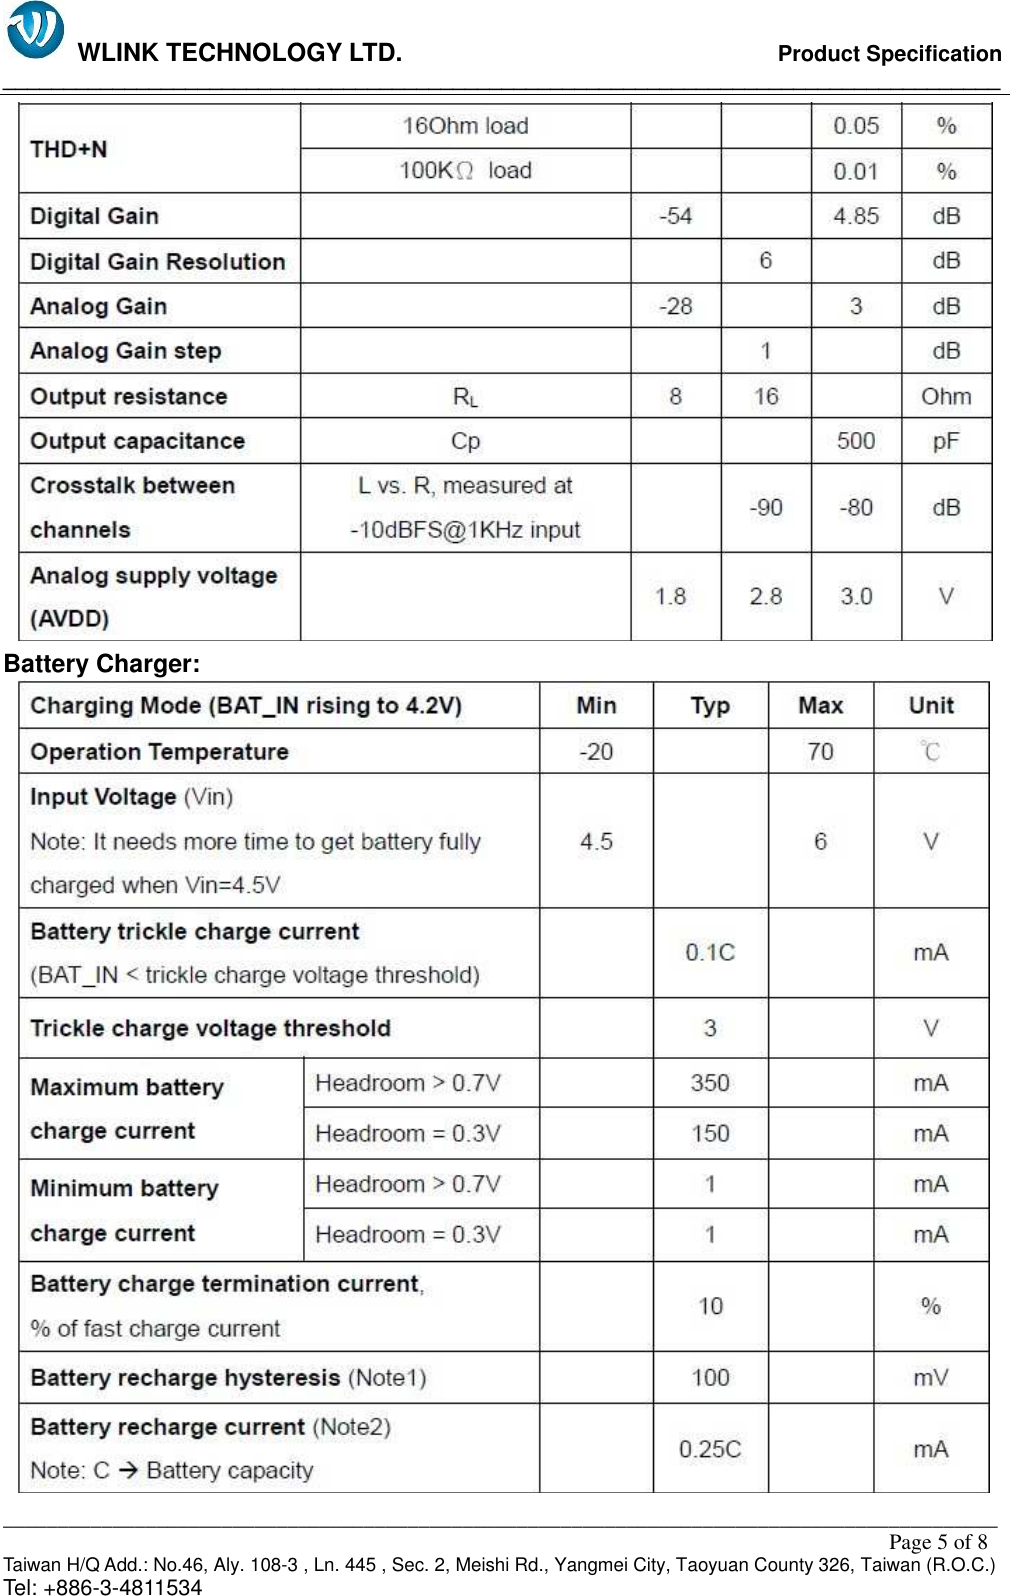   WLINK TECHNOLOGY LTD.                              Product Specification __________________________________________________________________________________ ___________________________________________________________________________________________                                                                                                                                                         Page 5 of 8 Taiwan H/Q Add.: No.46, Aly. 108-3 , Ln. 445 , Sec. 2, Meishi Rd., Yangmei City, Taoyuan County 326, Taiwan (R.O.C.)   Tel: +886-3-4811534  Battery Charger:  